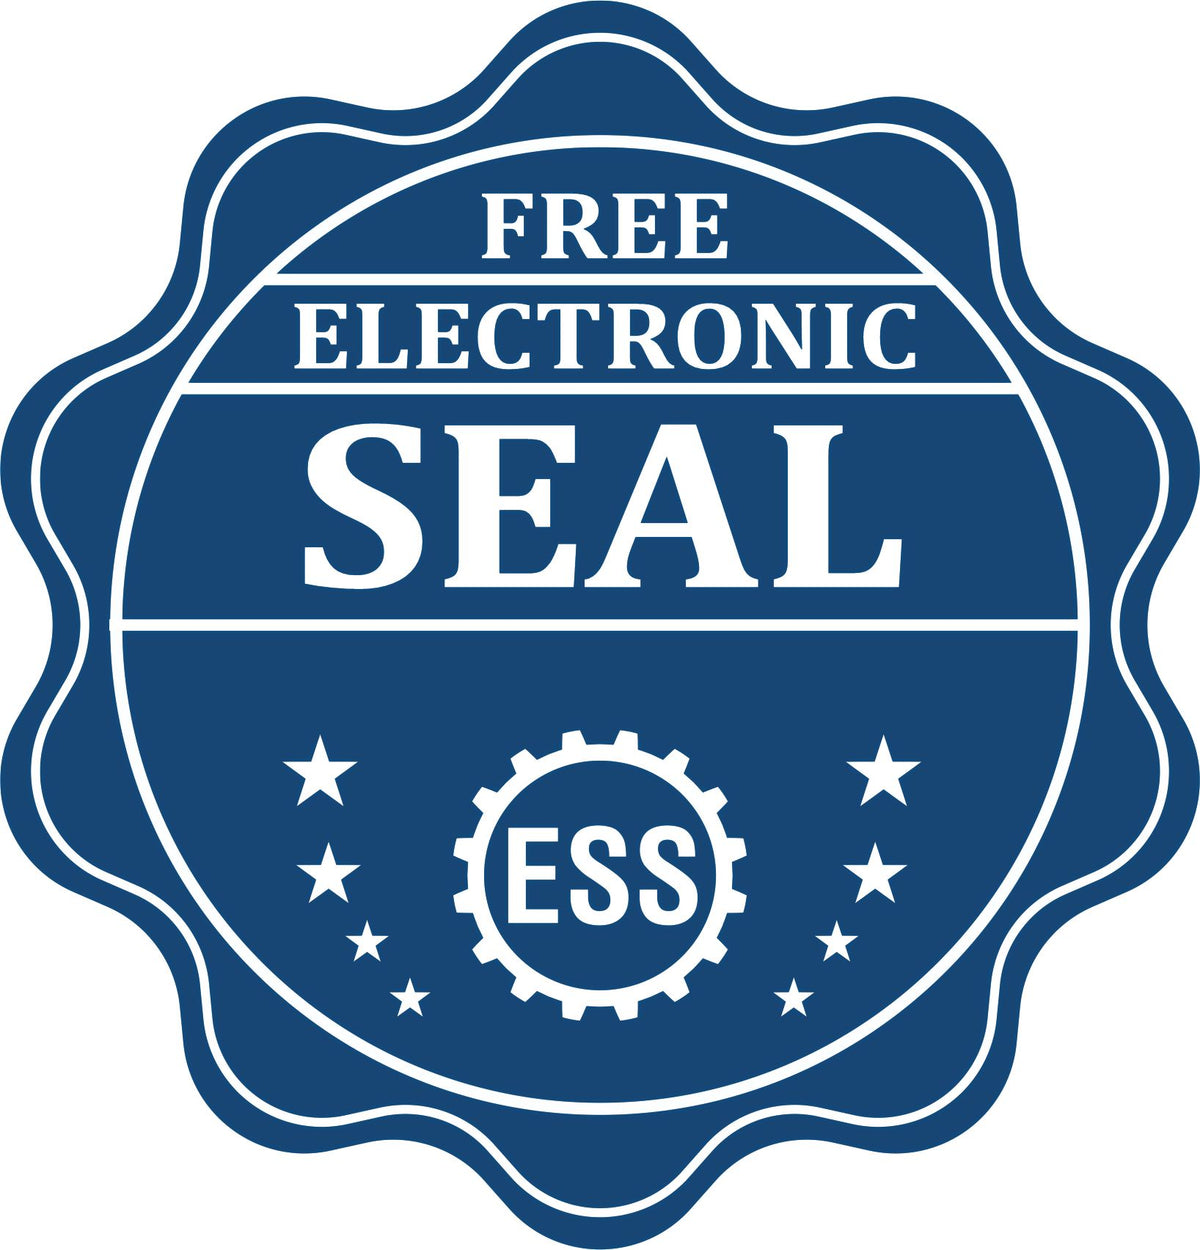 A badge showing a free electronic seal for the Hybrid Hawaii Landscape Architect Seal with stars and the ESS gear on the emblem.